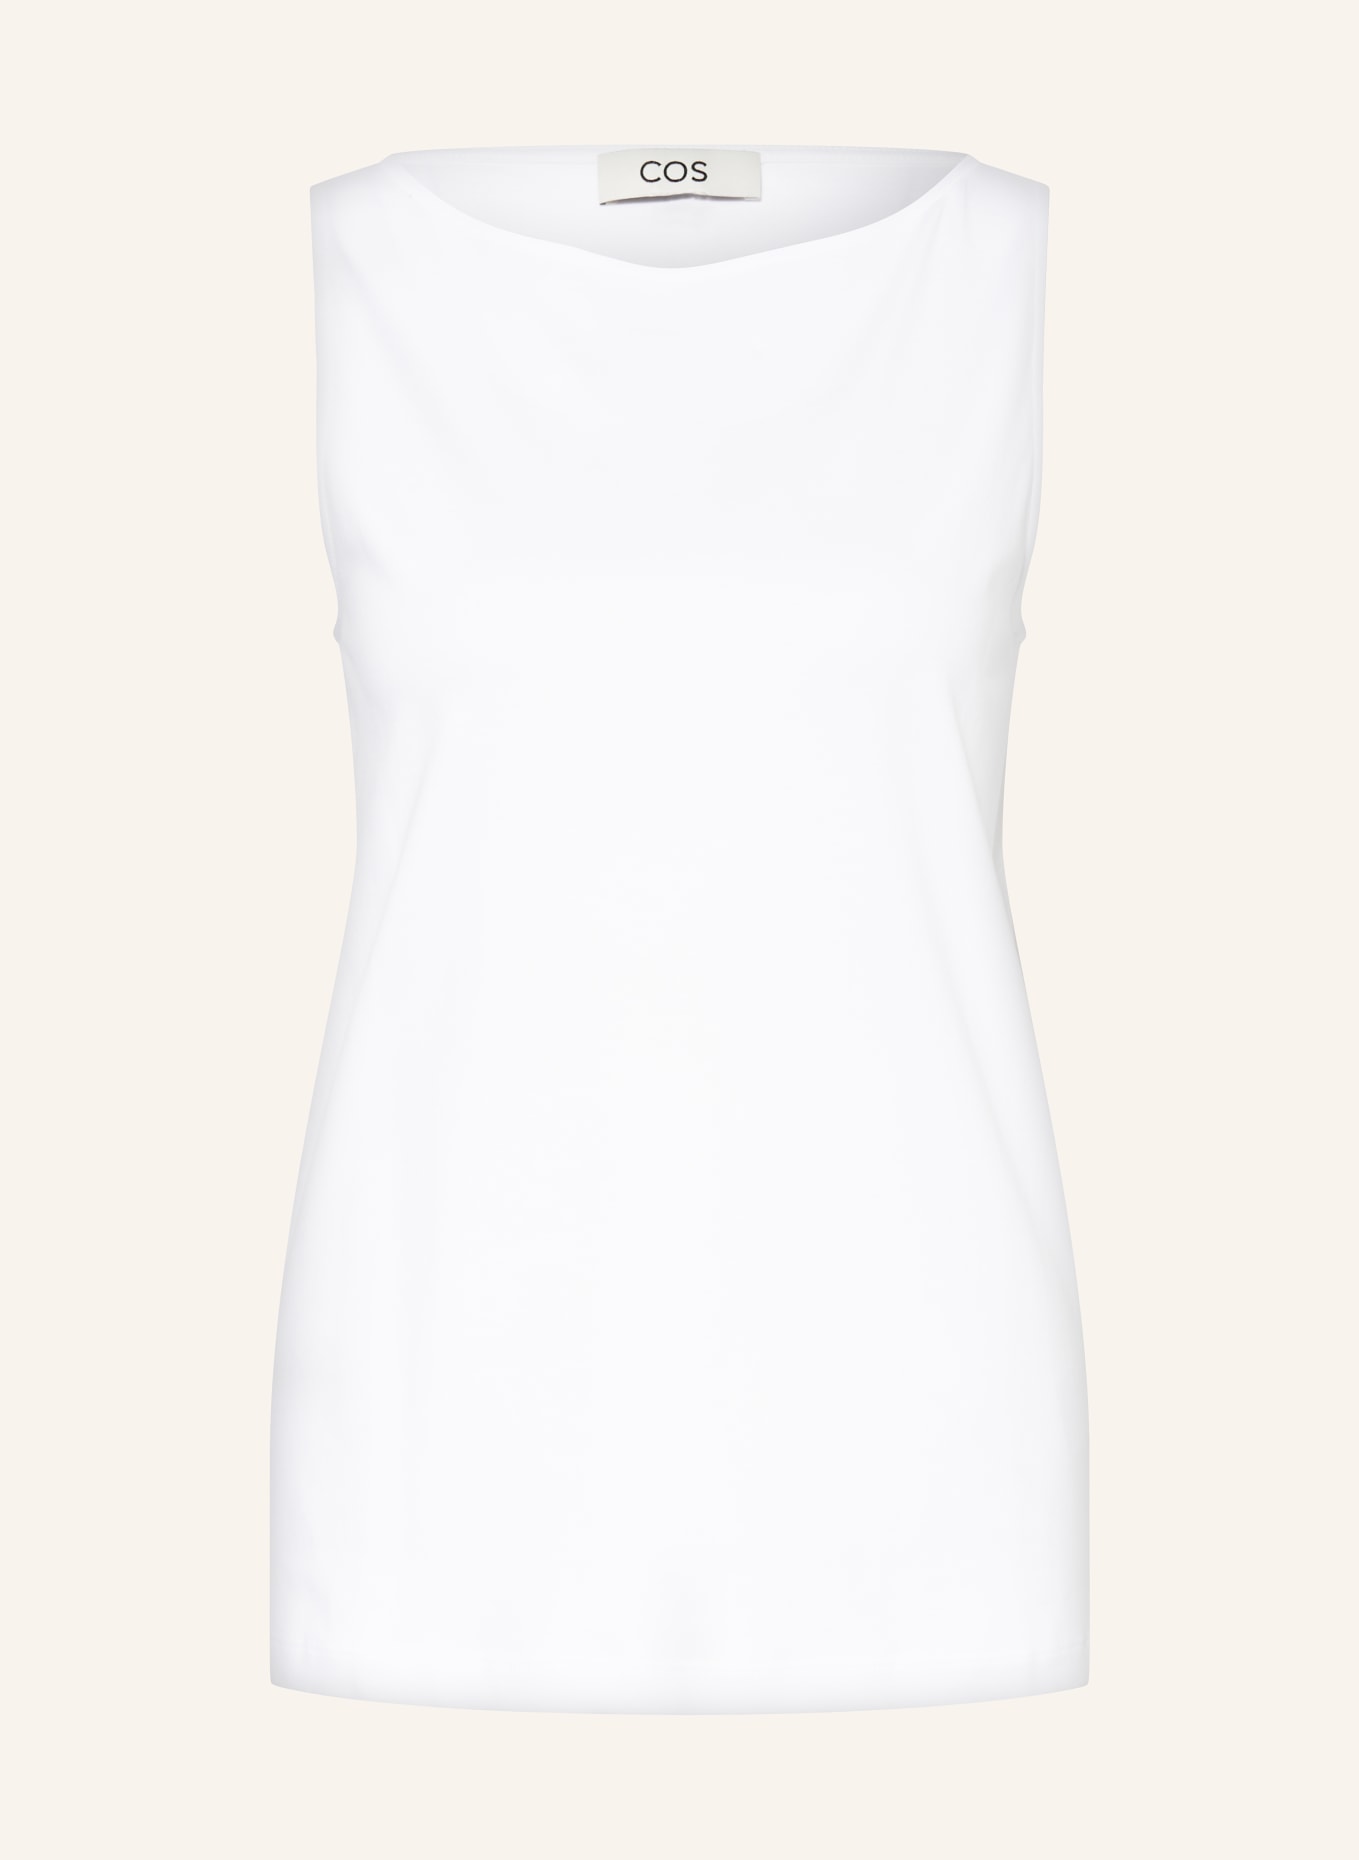 COS Top, Color: WHITE (Image 1)